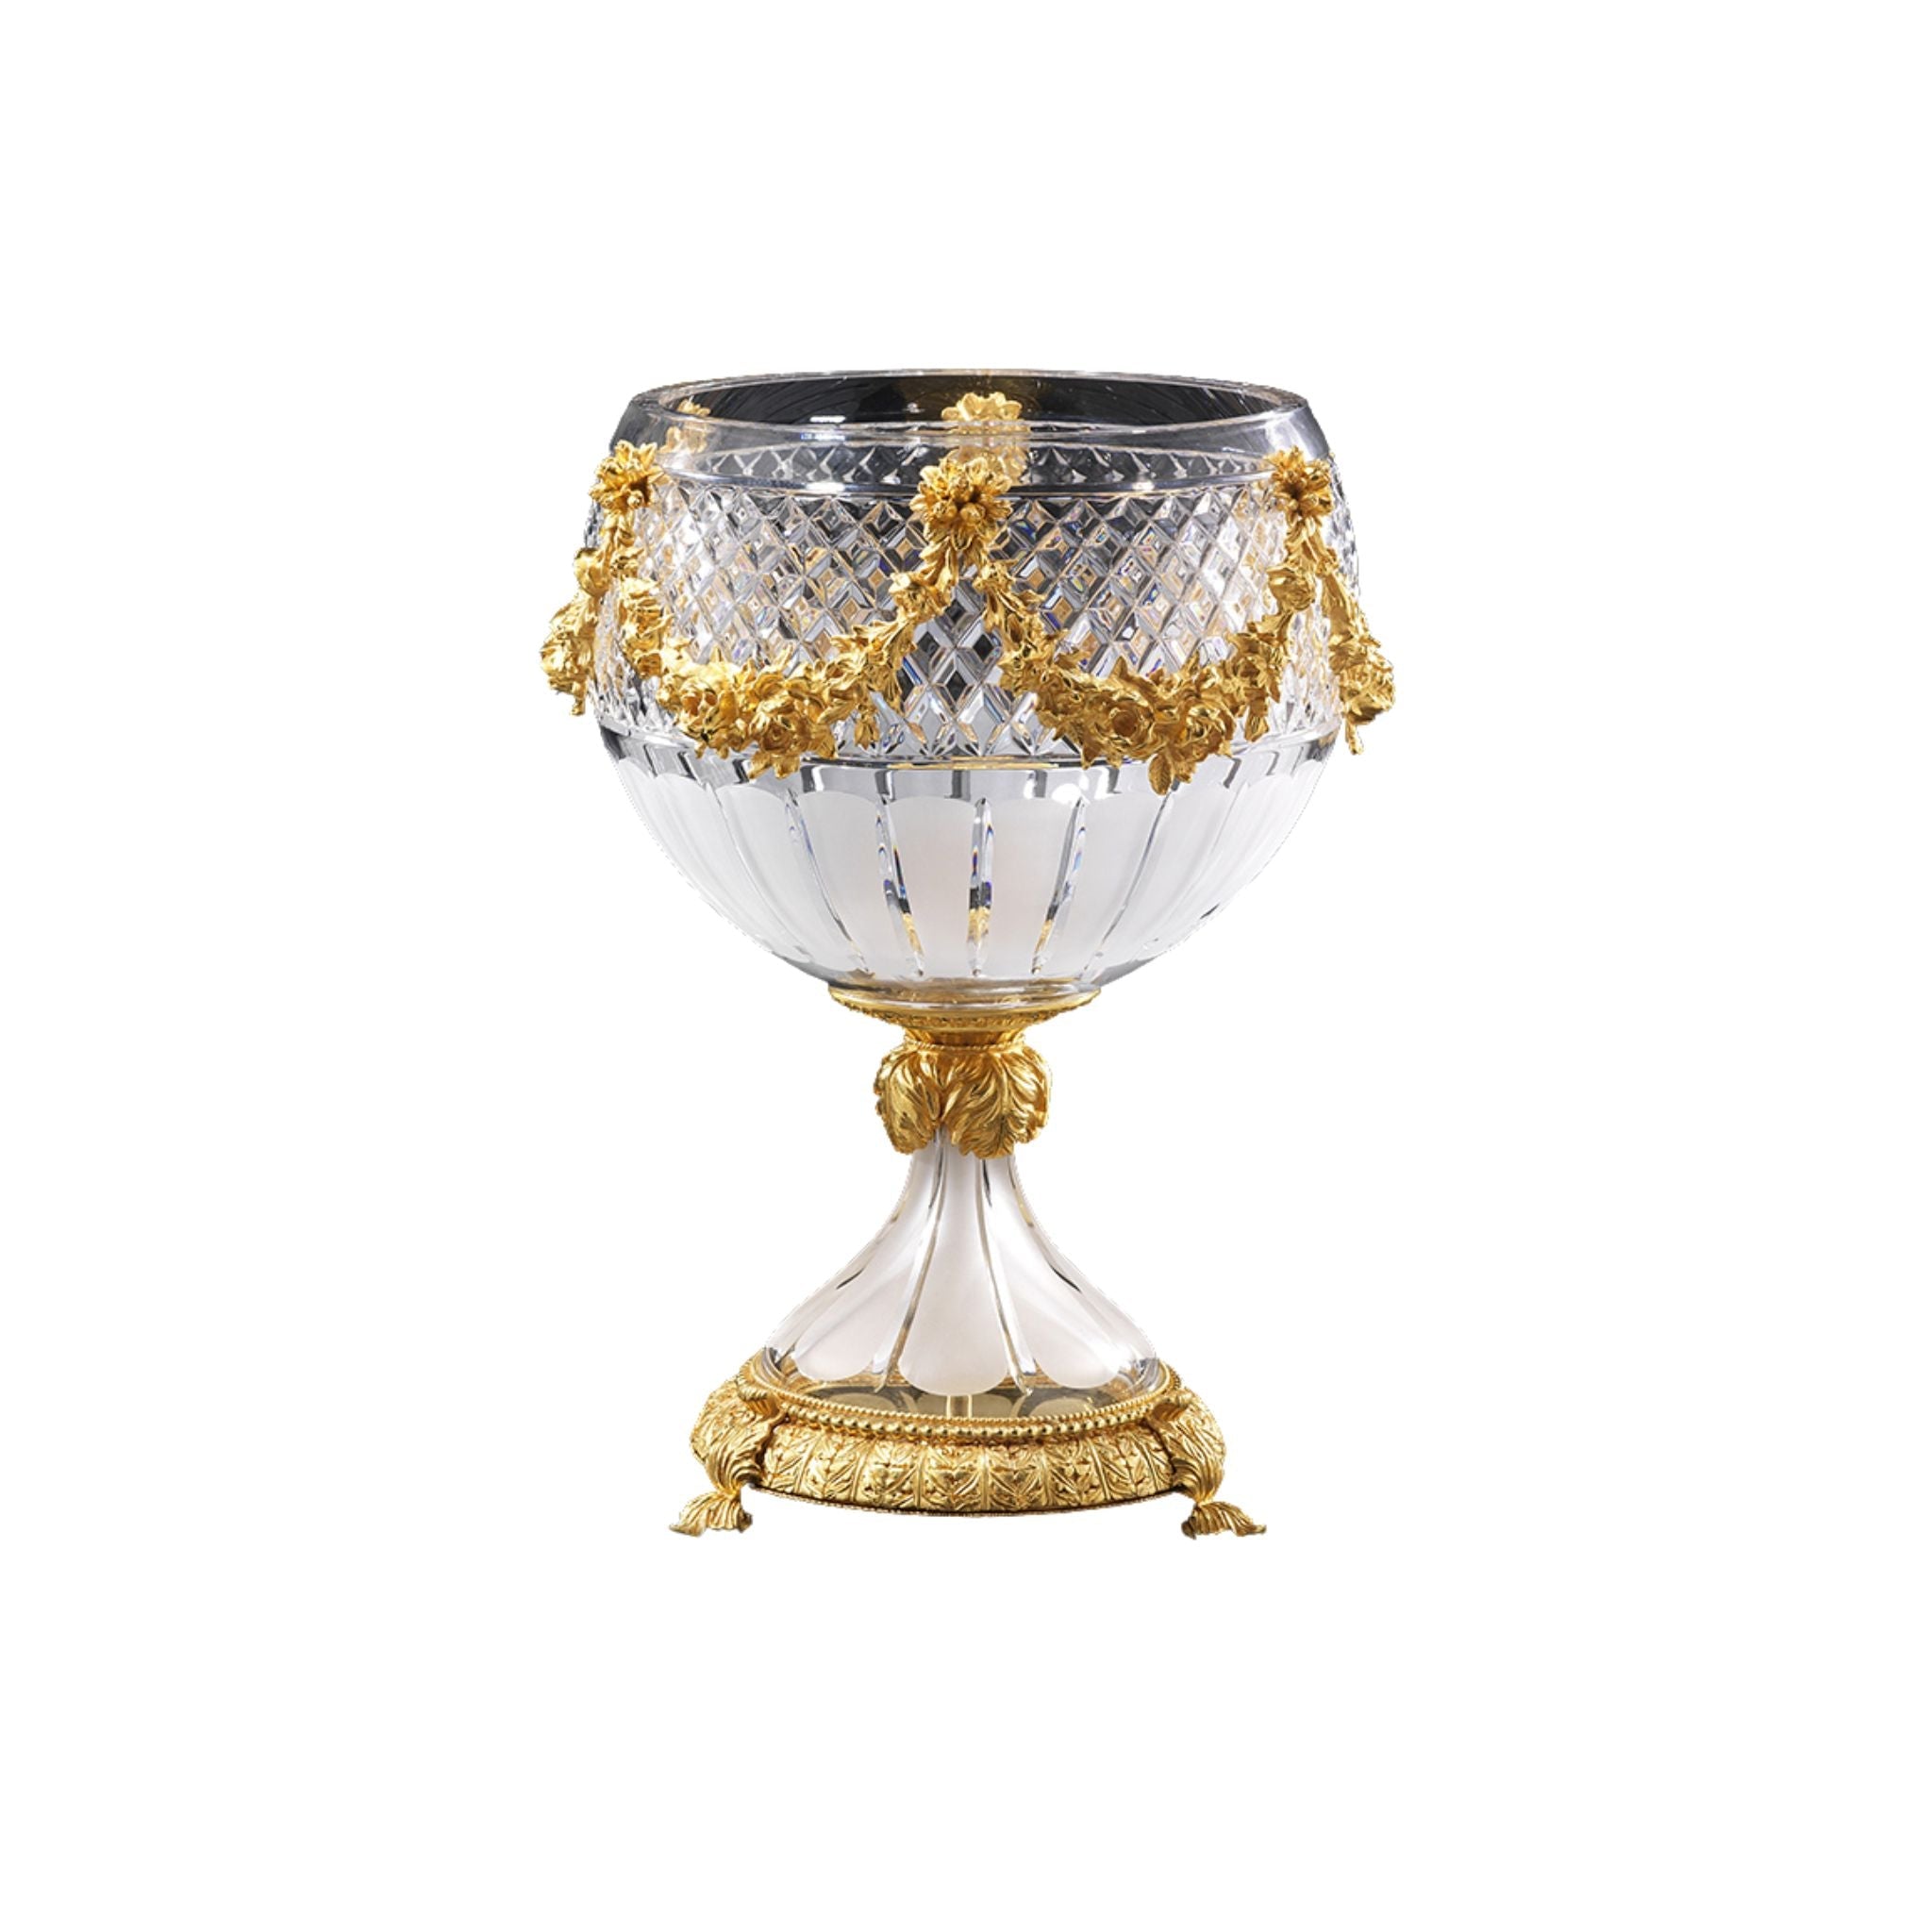 Reggia handgrined round cup with oval base - ilbronzetto